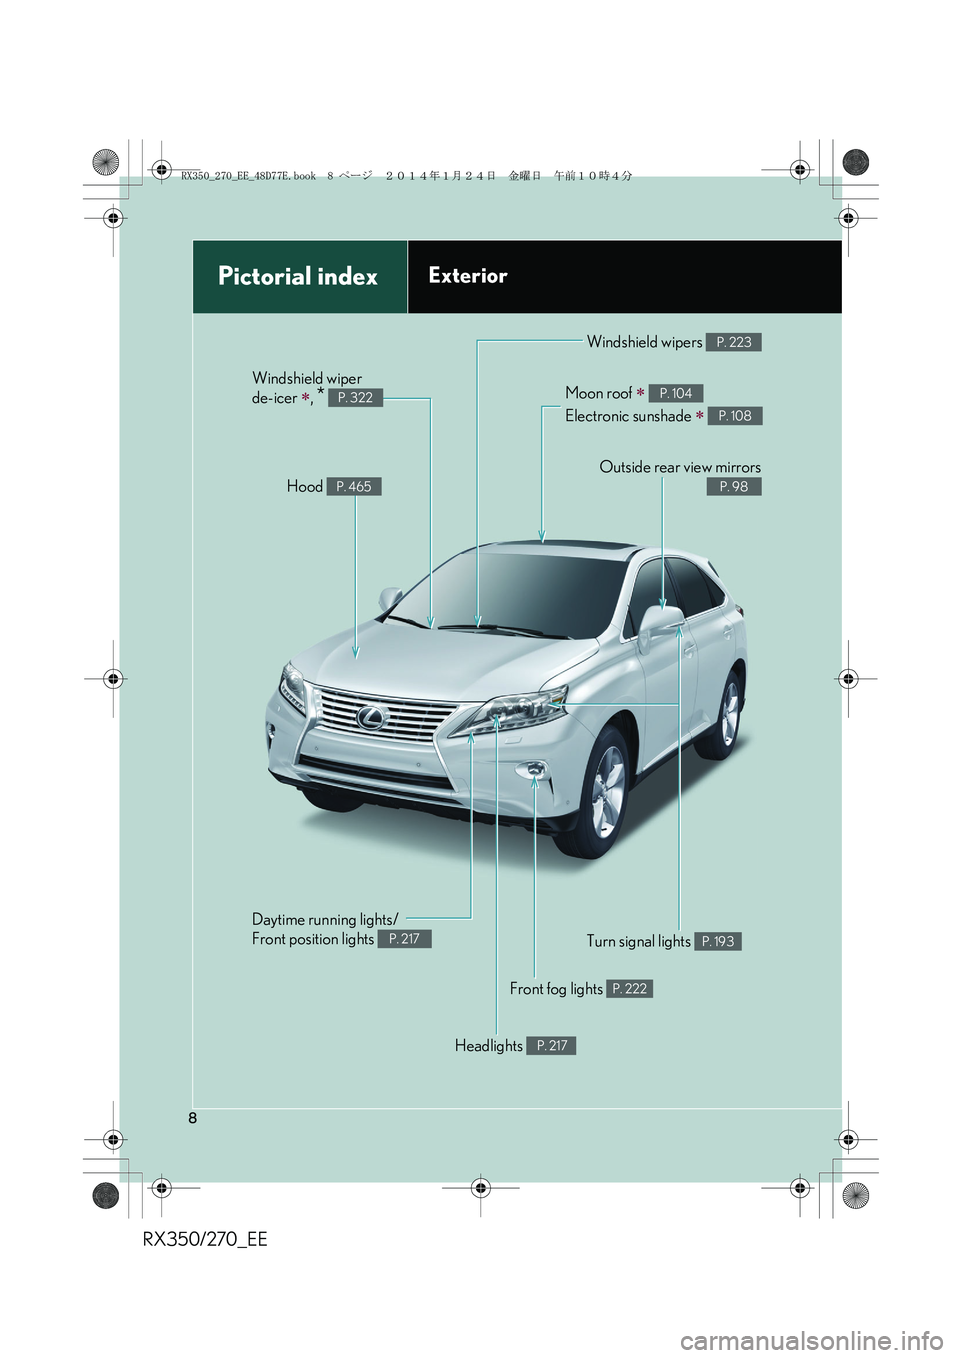 LEXUS RX270 2014  Owners Manual RX350/270_EE
8
Pictorial indexExterior
Headlights P. 217
Front fog lights P. 222
Turn signal lights P. 193
Windshield wipers P. 223
Moon roof ∗ 
Electronic sunshade 
∗ 
P. 104
P. 108
Outside rear 